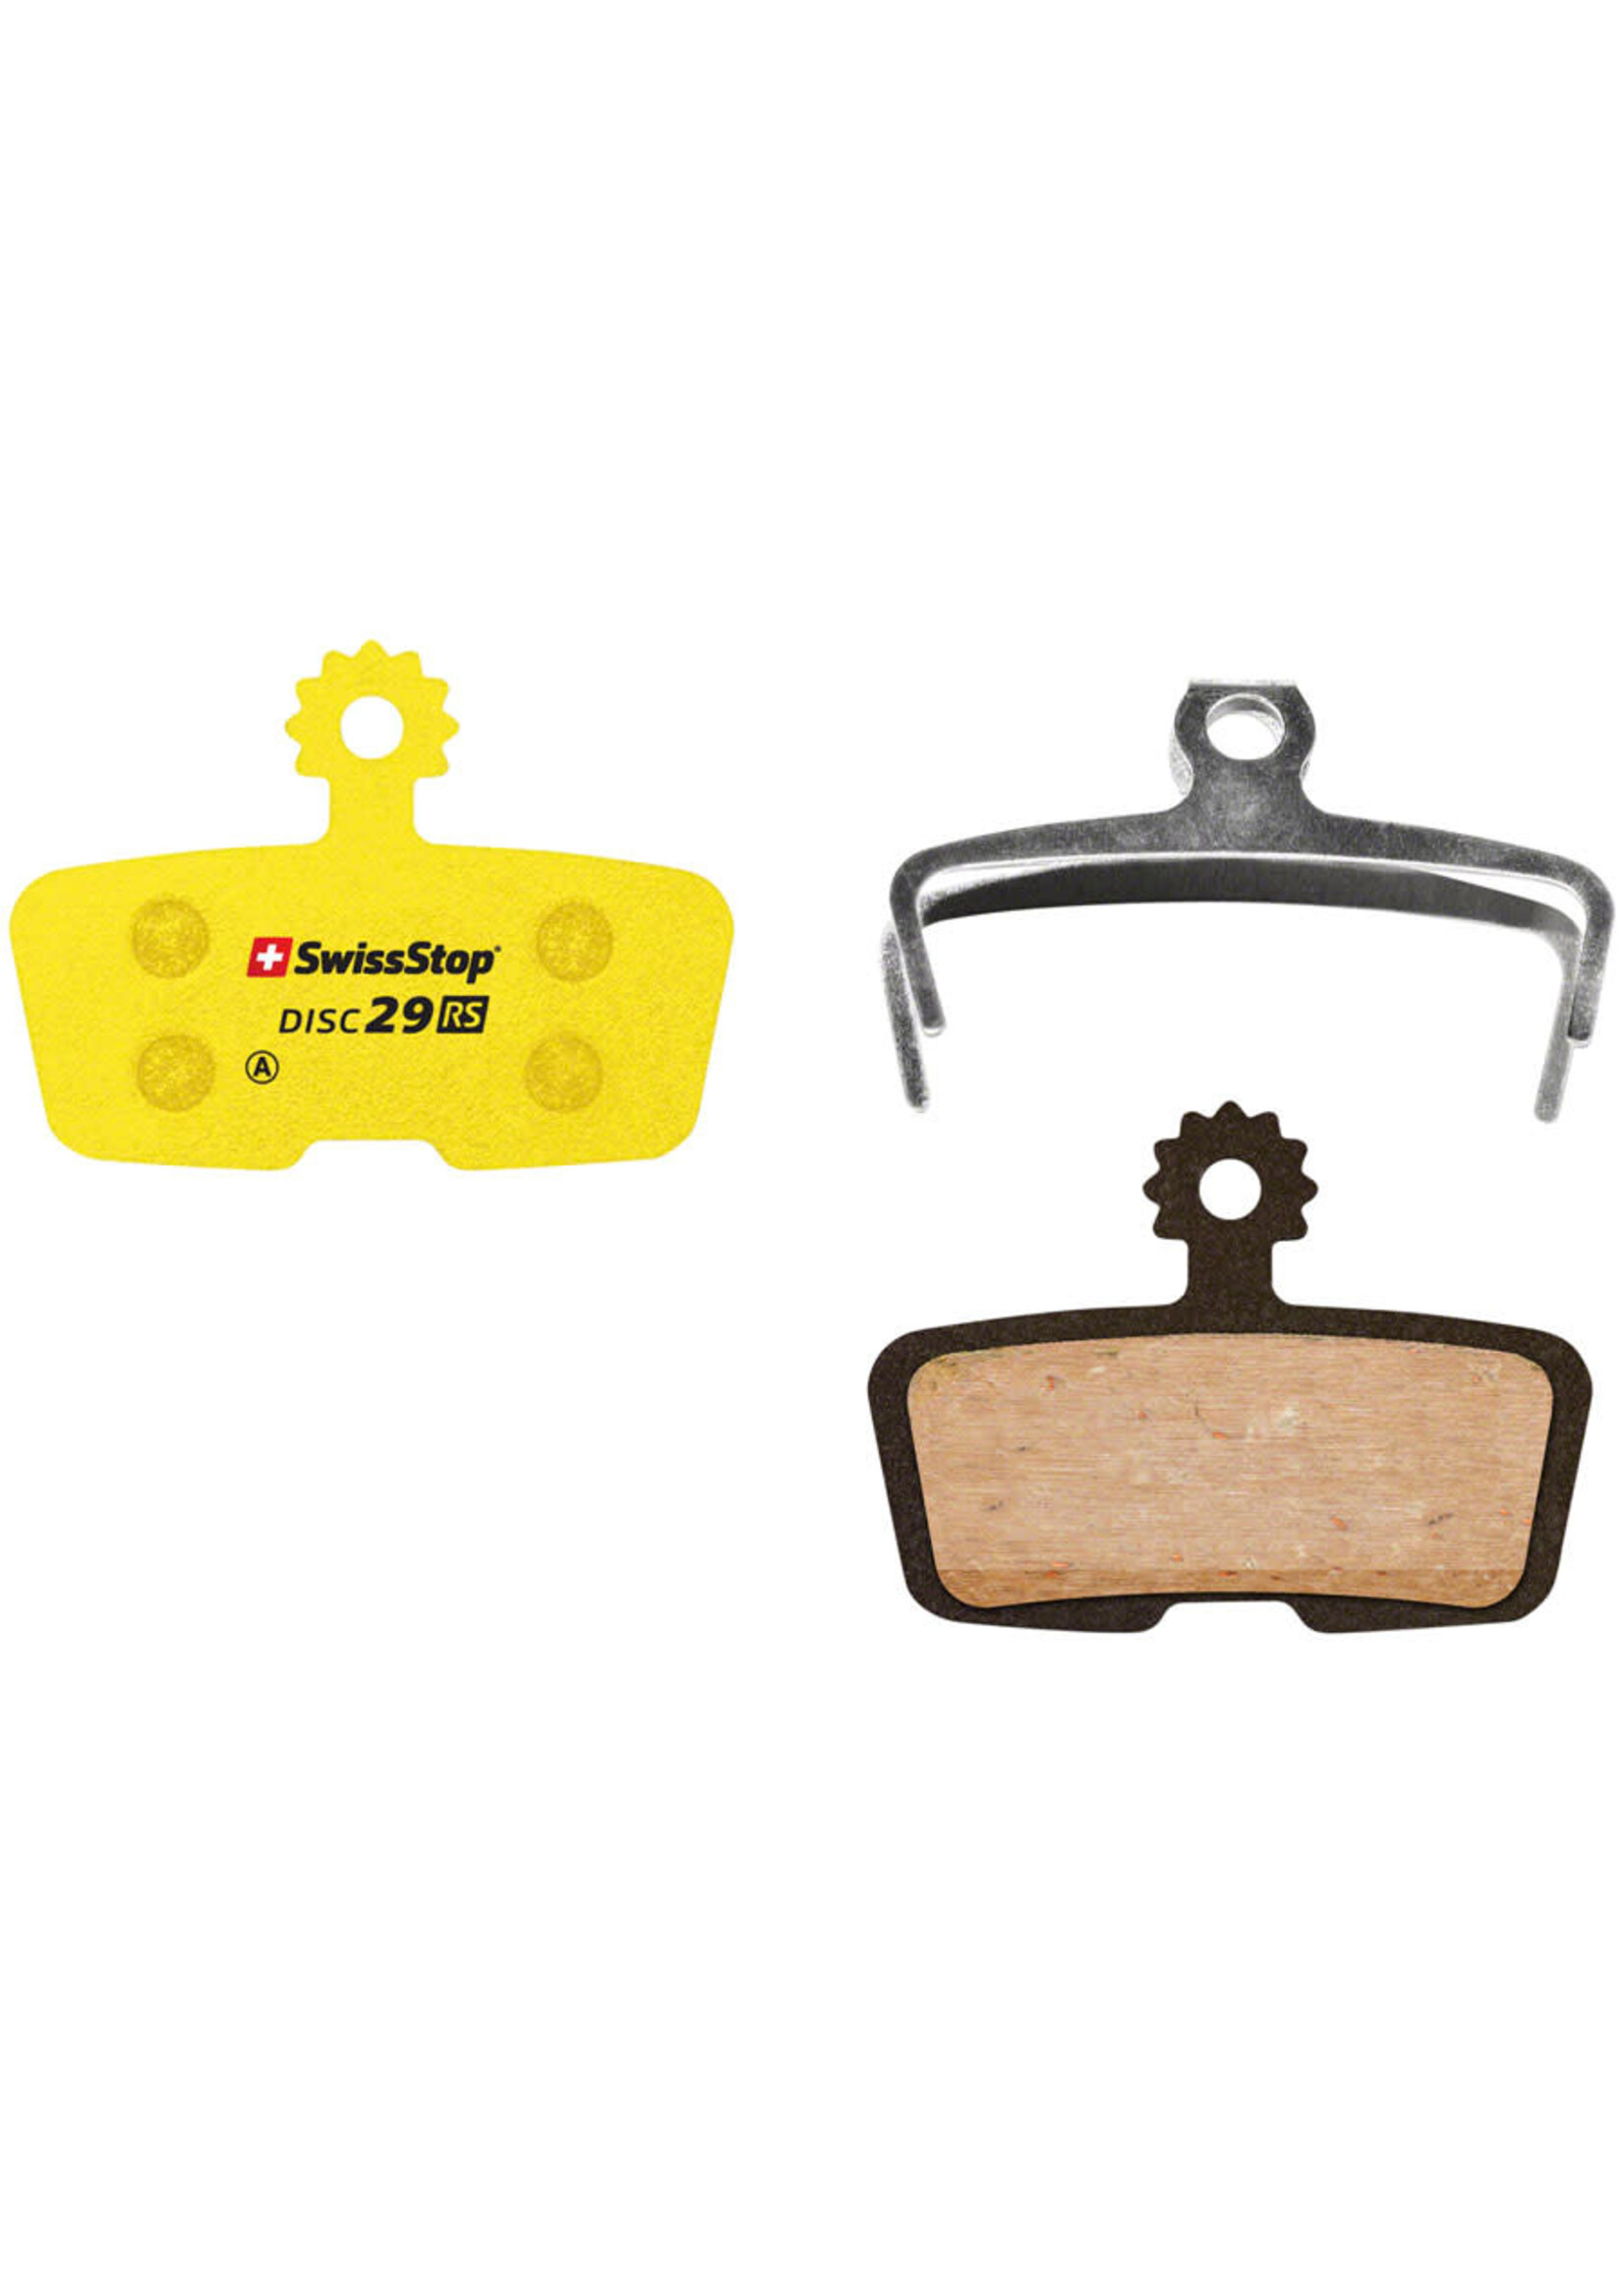 SwissStop SwissStop RS 29 Disc Brake Pad - Organic Compound, For Code and Guide